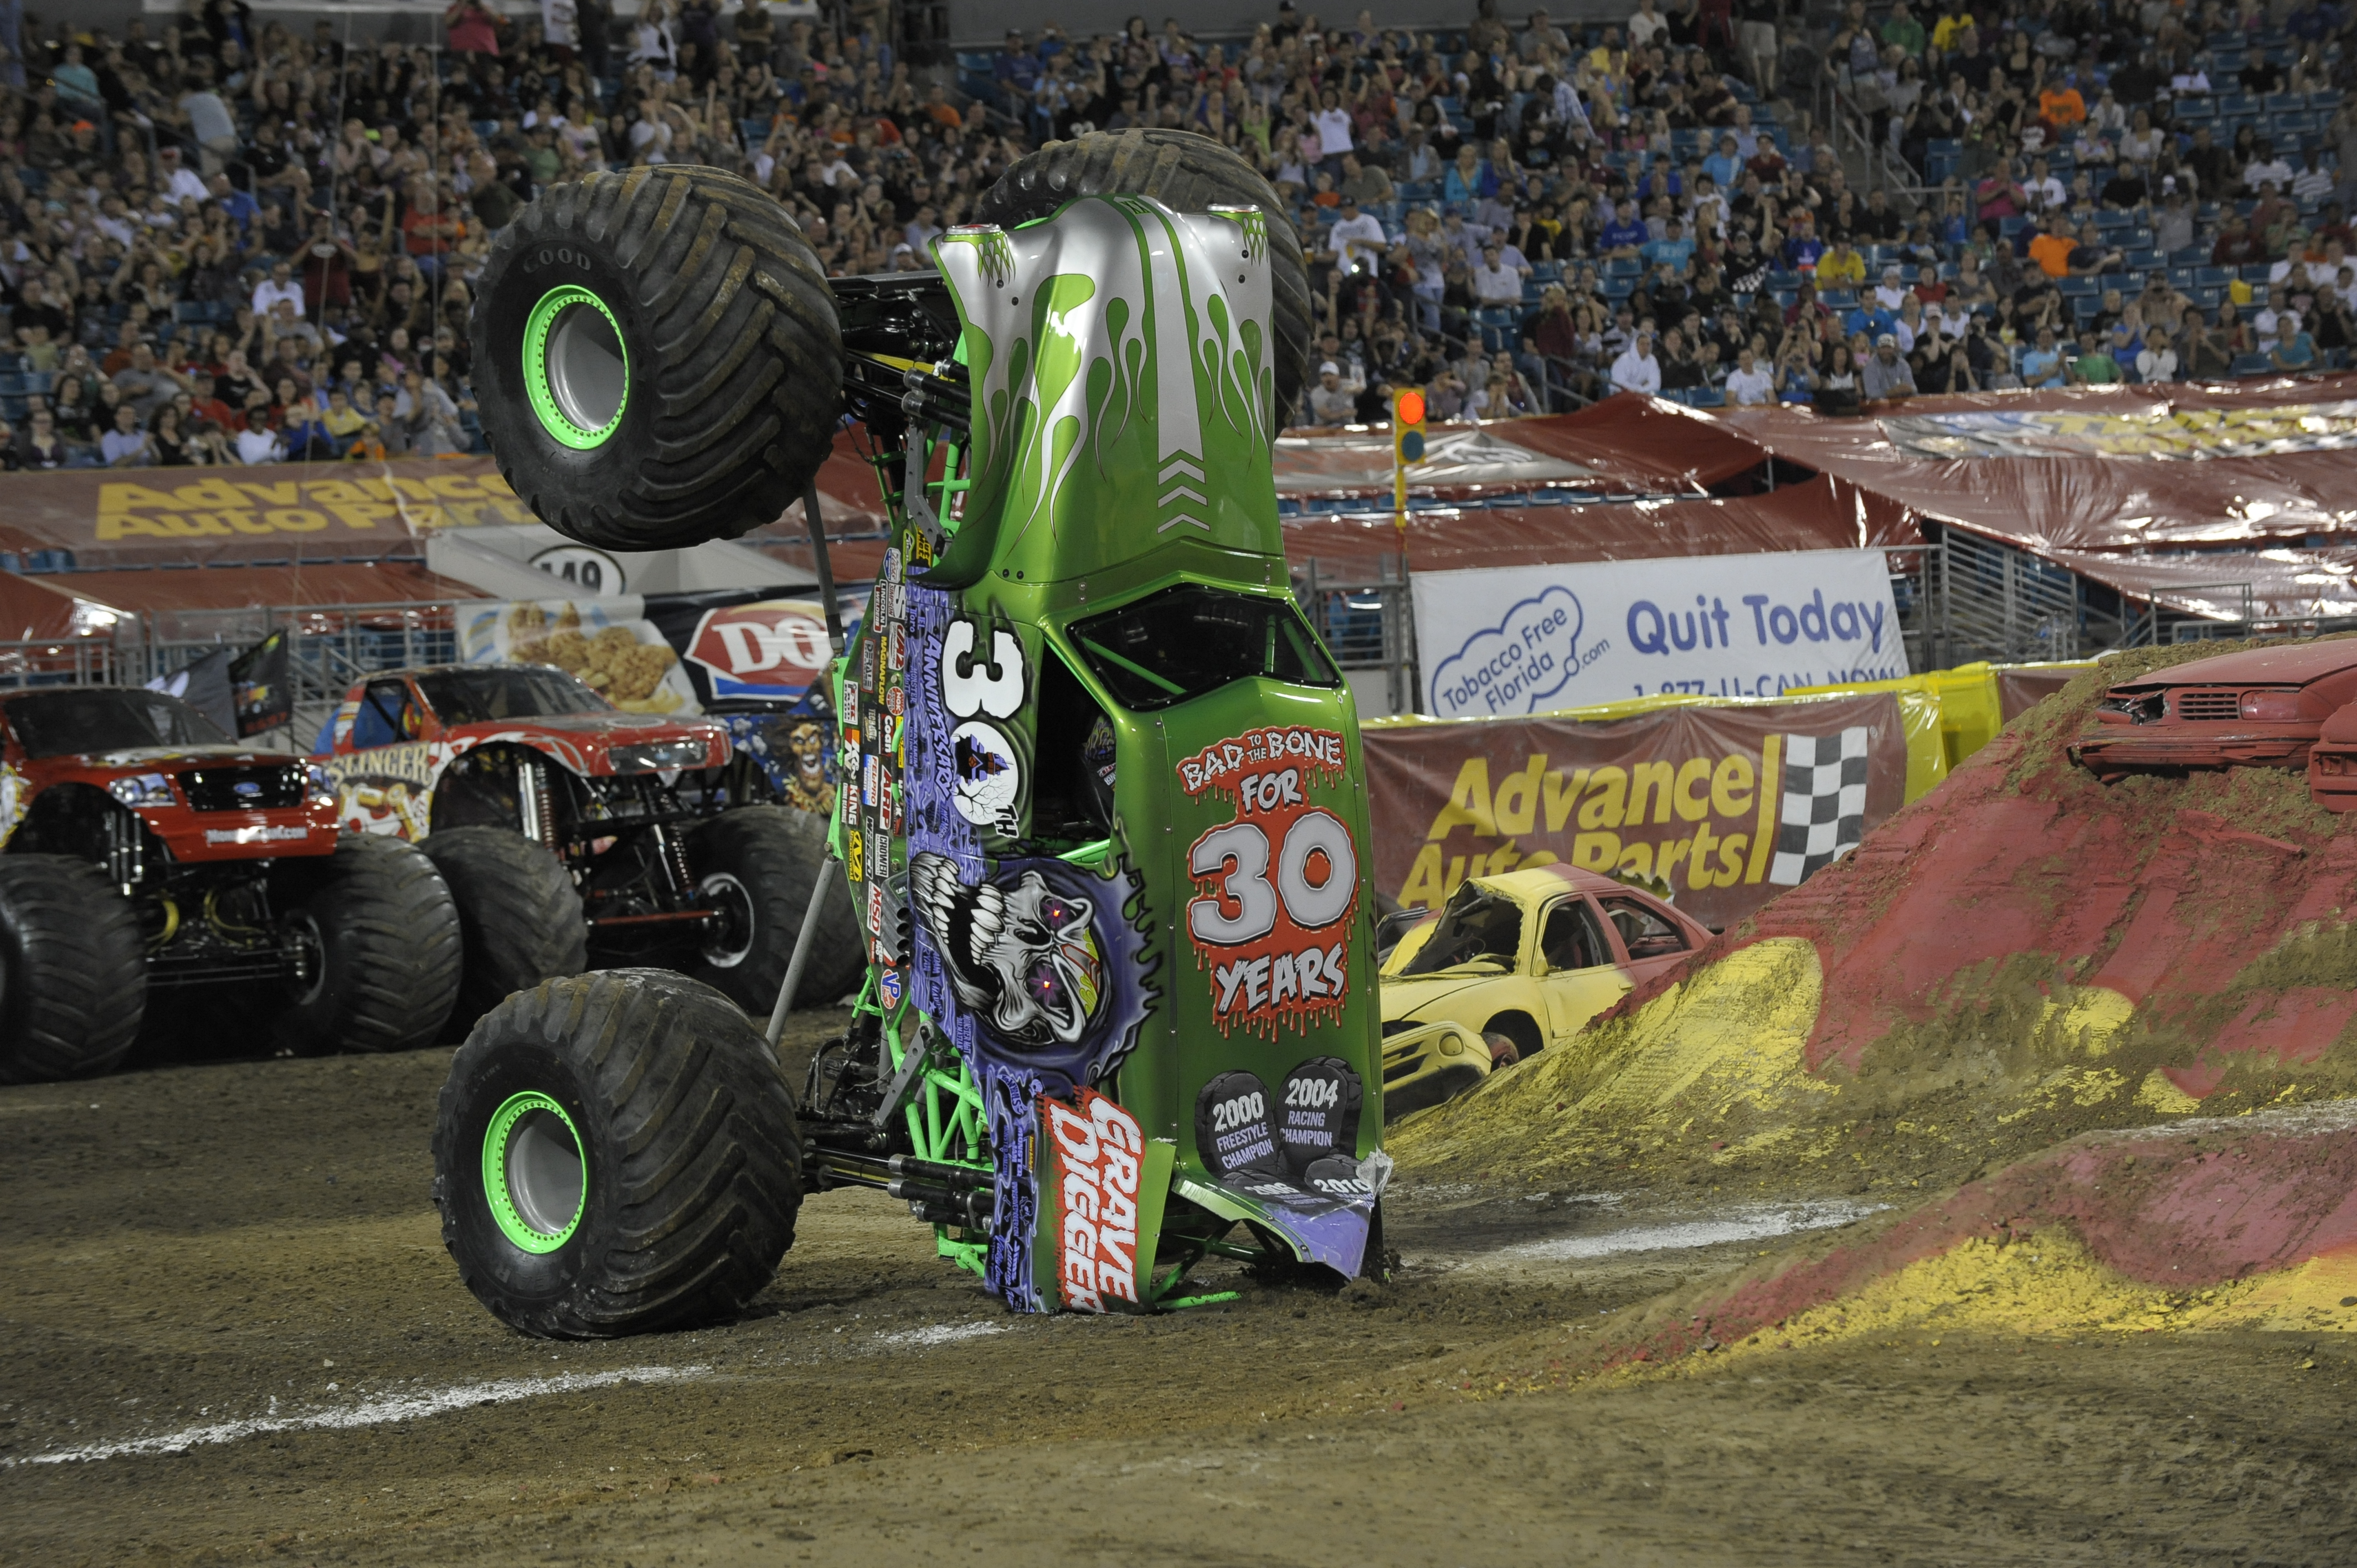 MONSTER JAM! is coming to Cincinnati win tickets to the show!! All